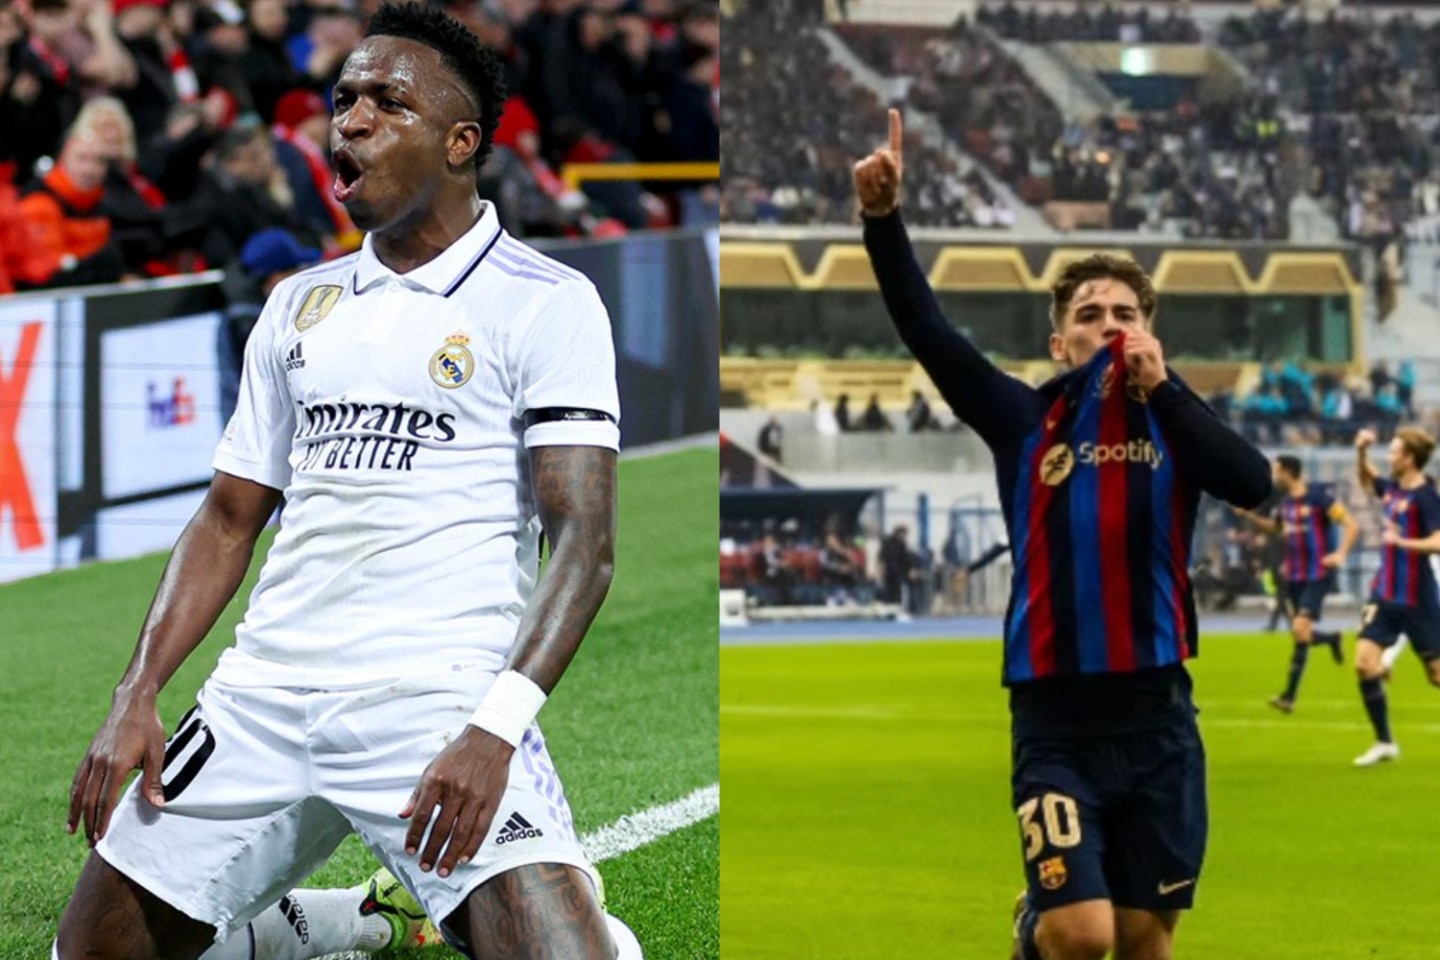 Real Madrid vs Barcelona Live Streaming When And Where To Watch Copa del Rey Semifinals Leg 1 Of 2 Online And On TV Fancode